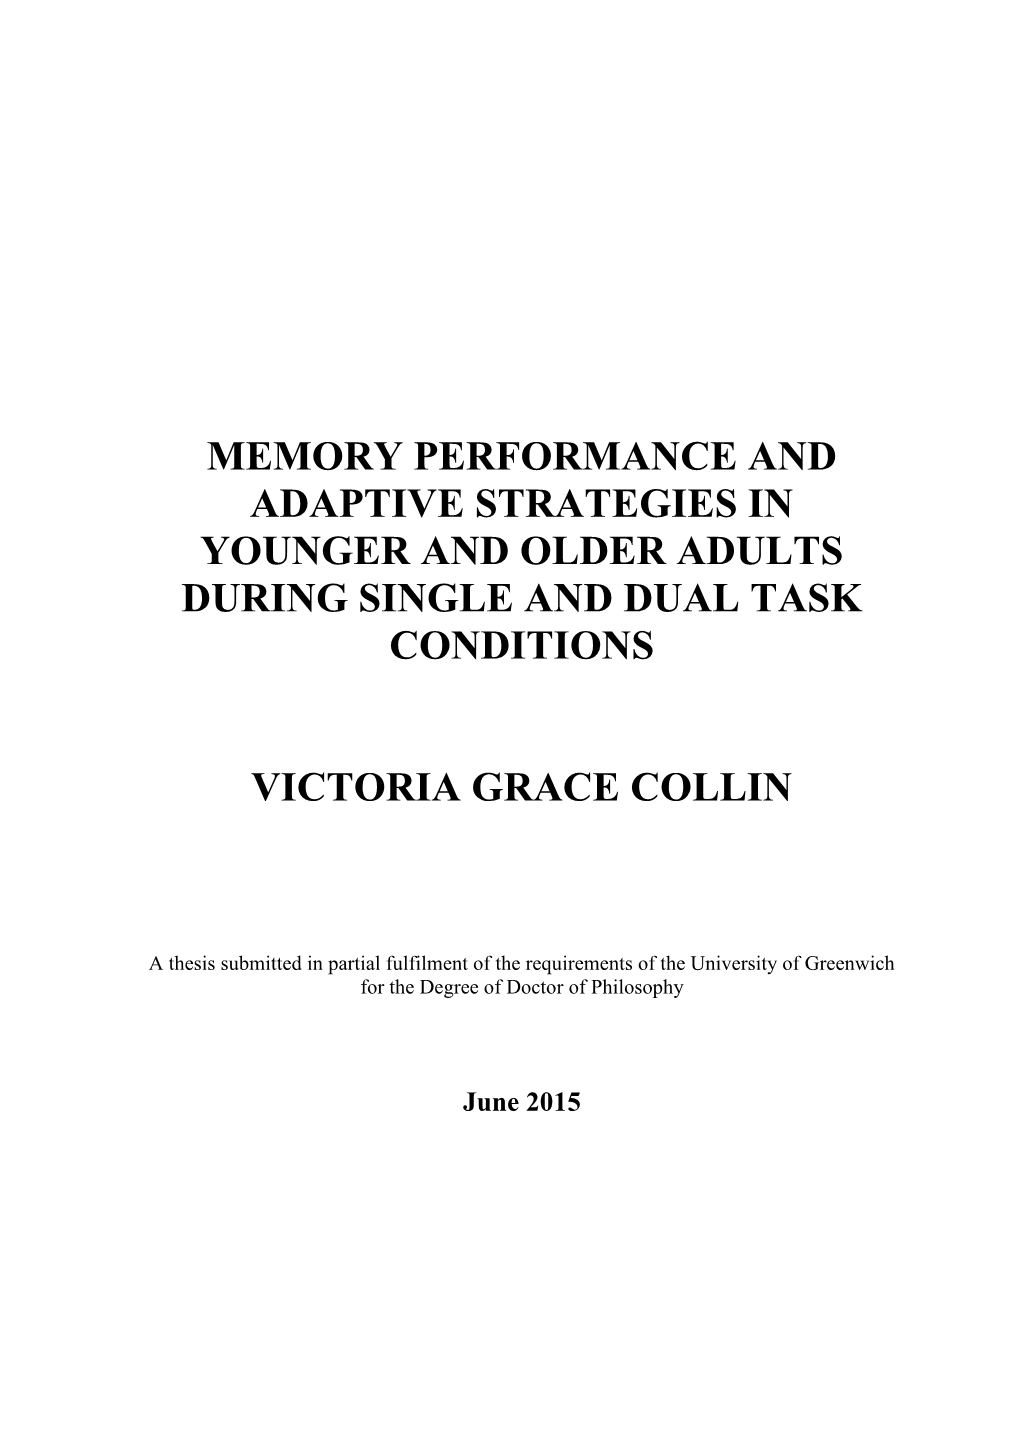 Memory Performance and Adaptive Strategies in Younger and Older Adults During Single and Dual Task Conditions